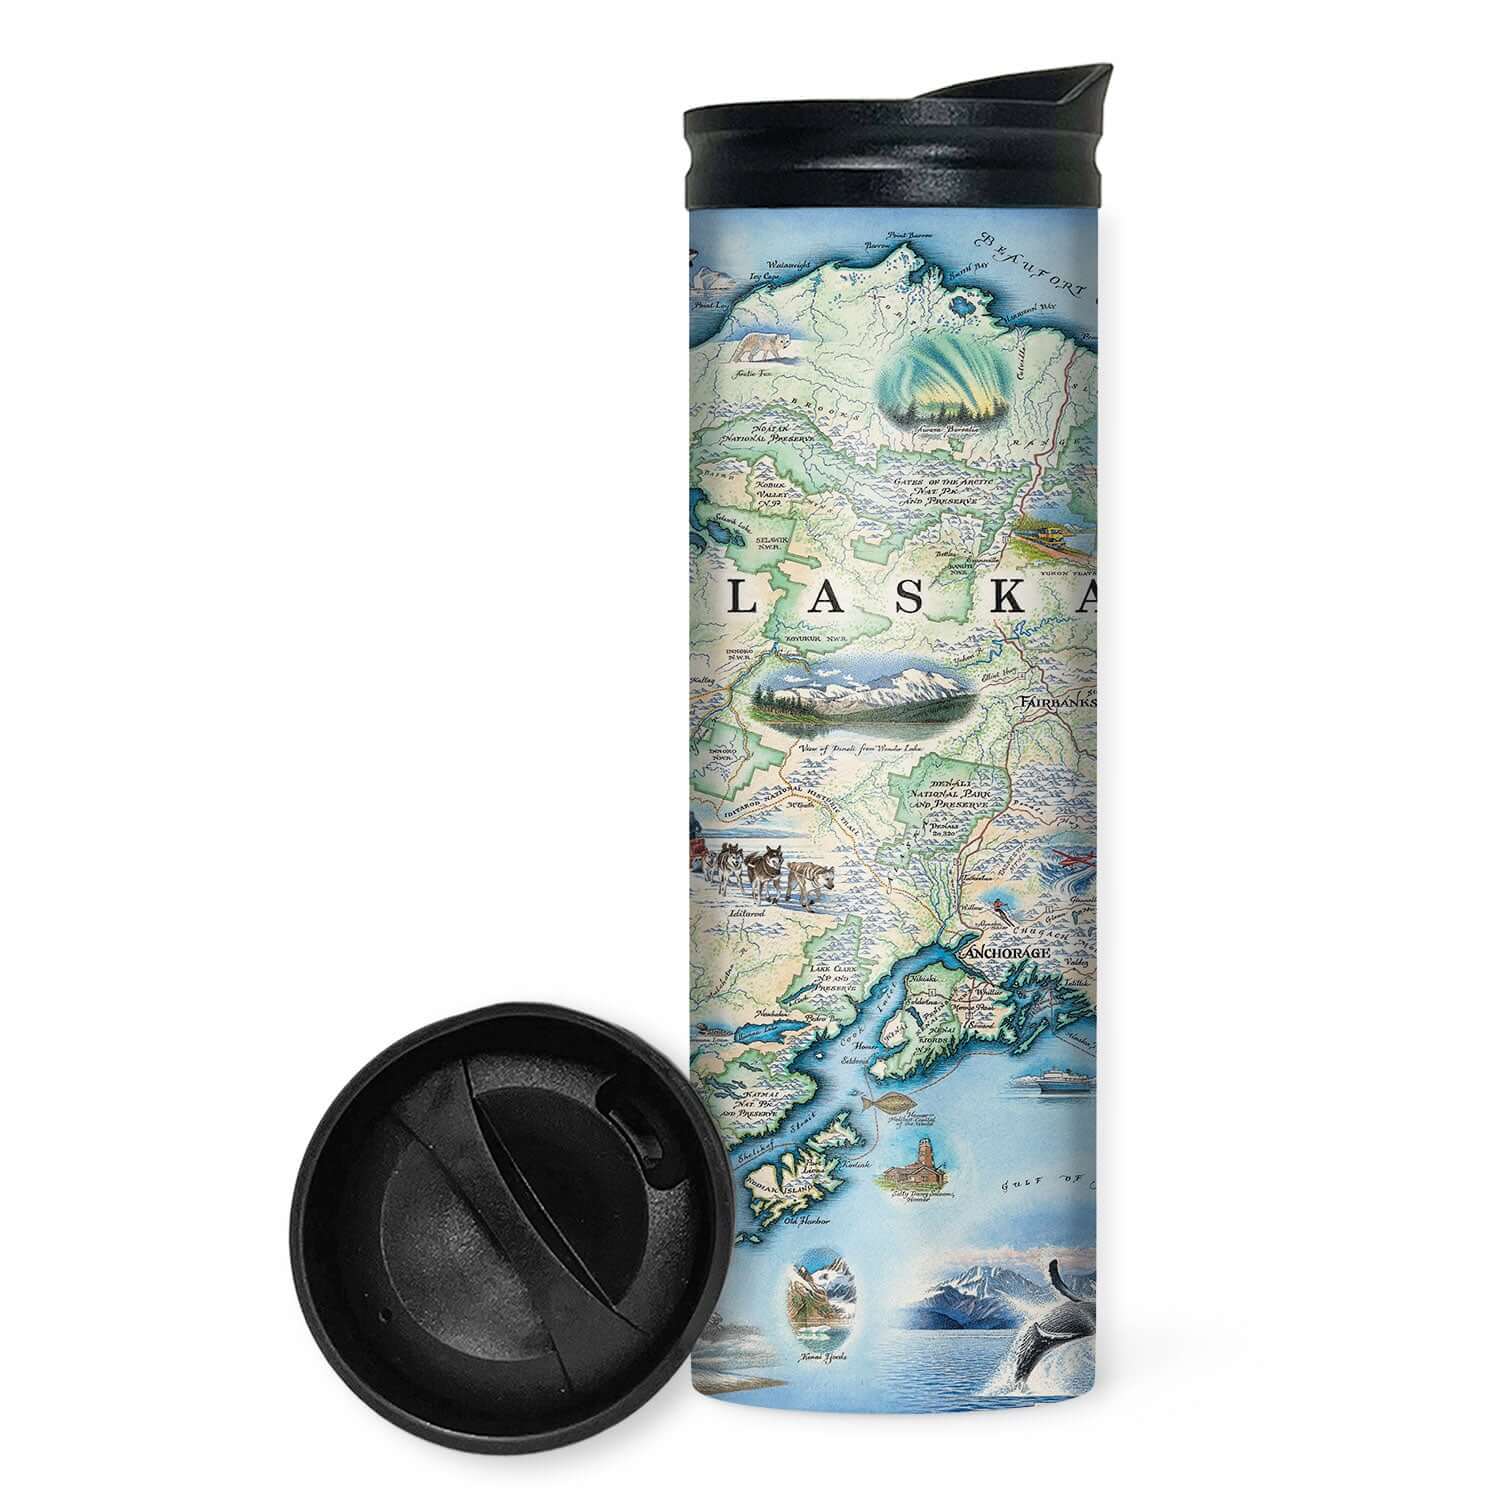 Alaska State Map 16 oz Travel Drinkware in earth tone colors. in earth tone colors of blues and greens. The Map features Anchorage, Juneau, Fair Banks, Denali National Park, Iditarod Trail Sled Dog Race, bears, elk, moose, whales, a mountain goat & a sheep.  